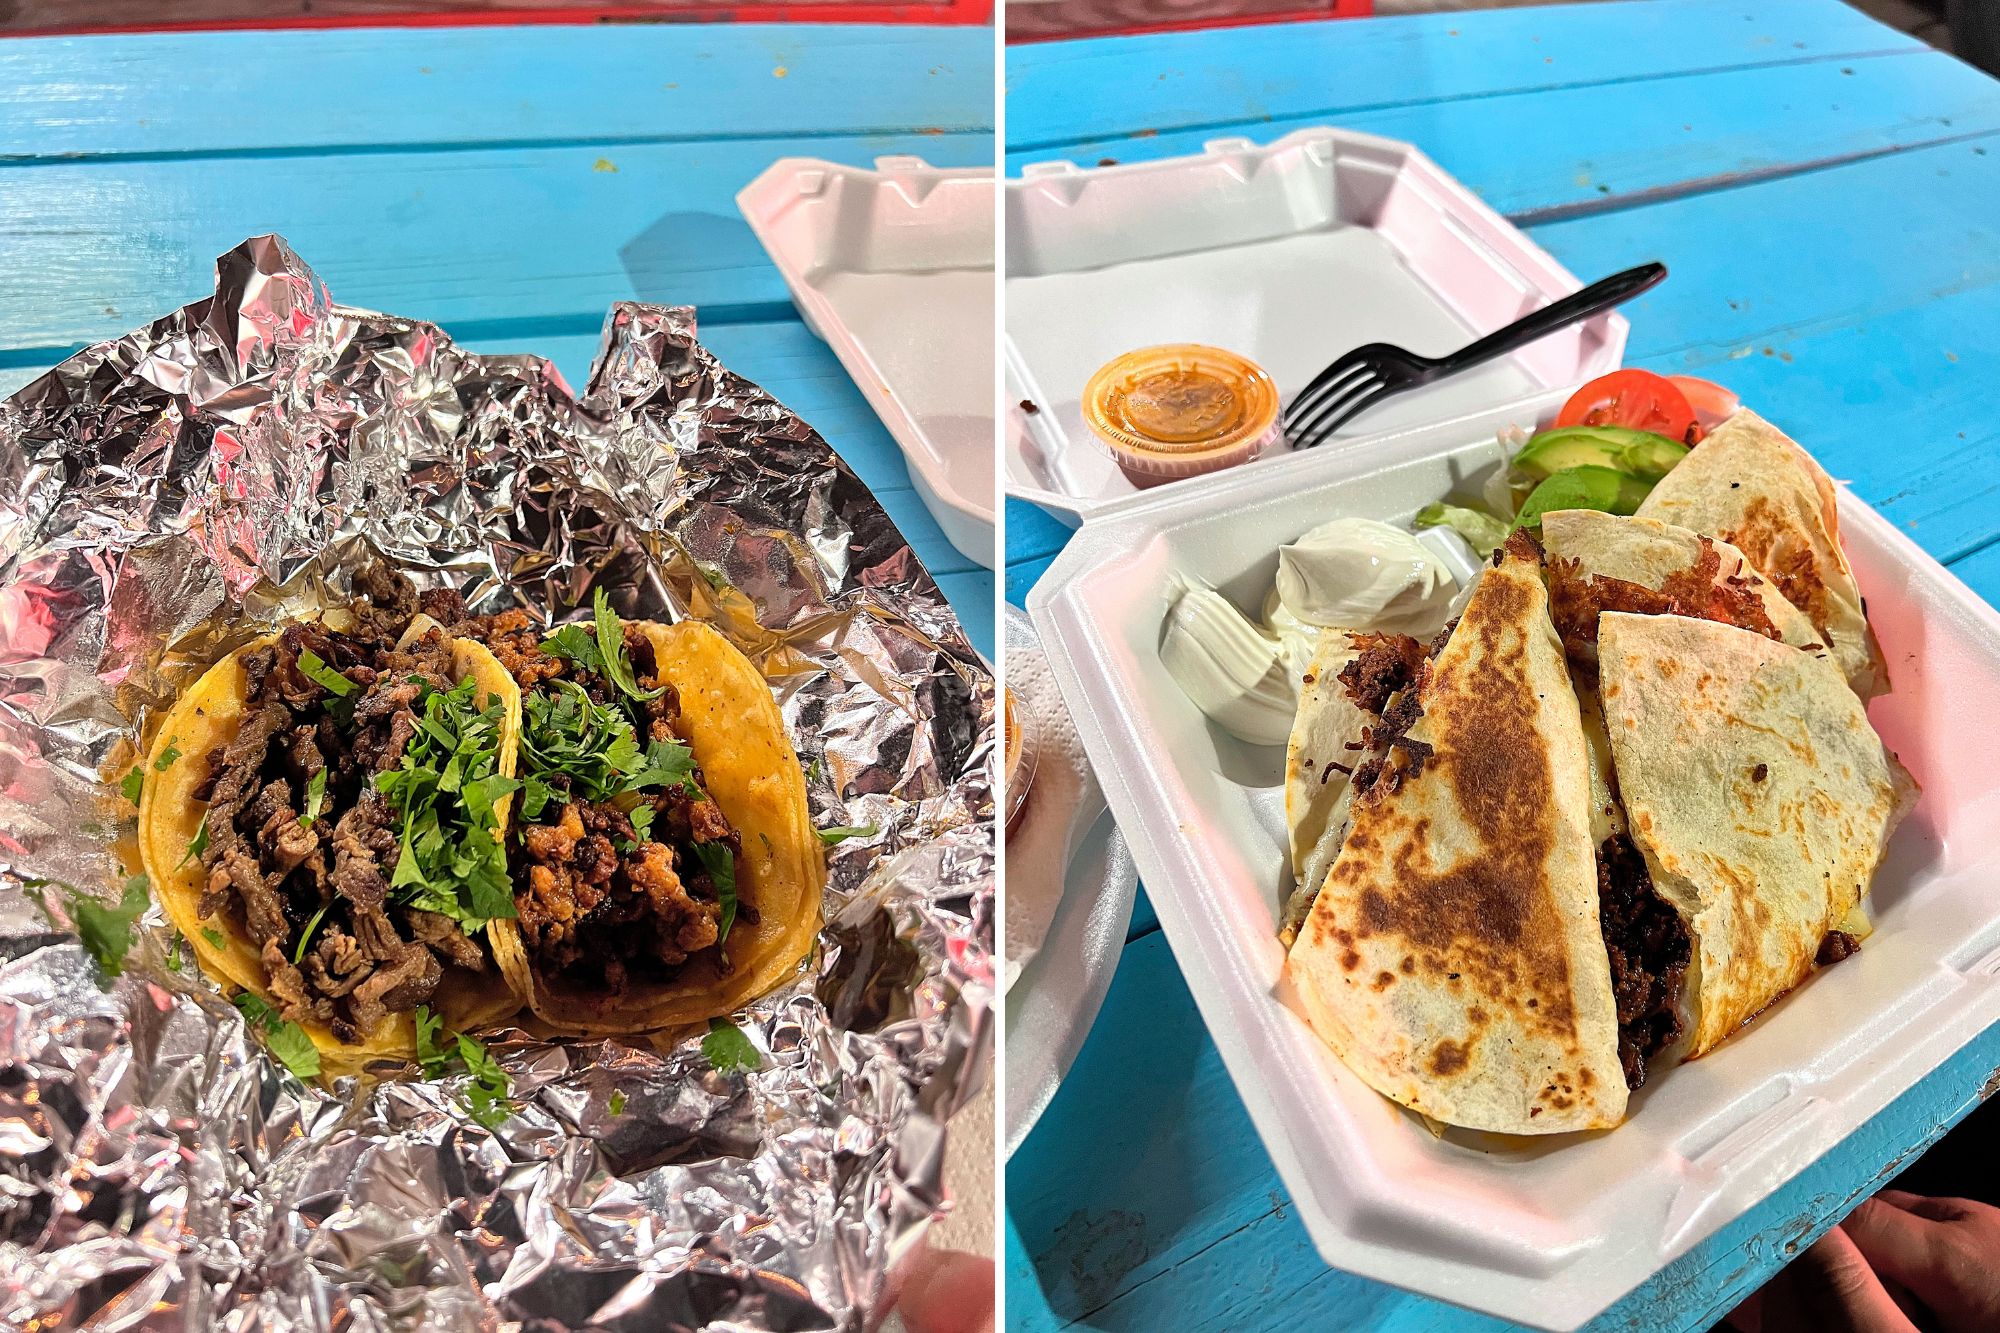 Tacos and a quesadilla from Las Trancas Taco Stand